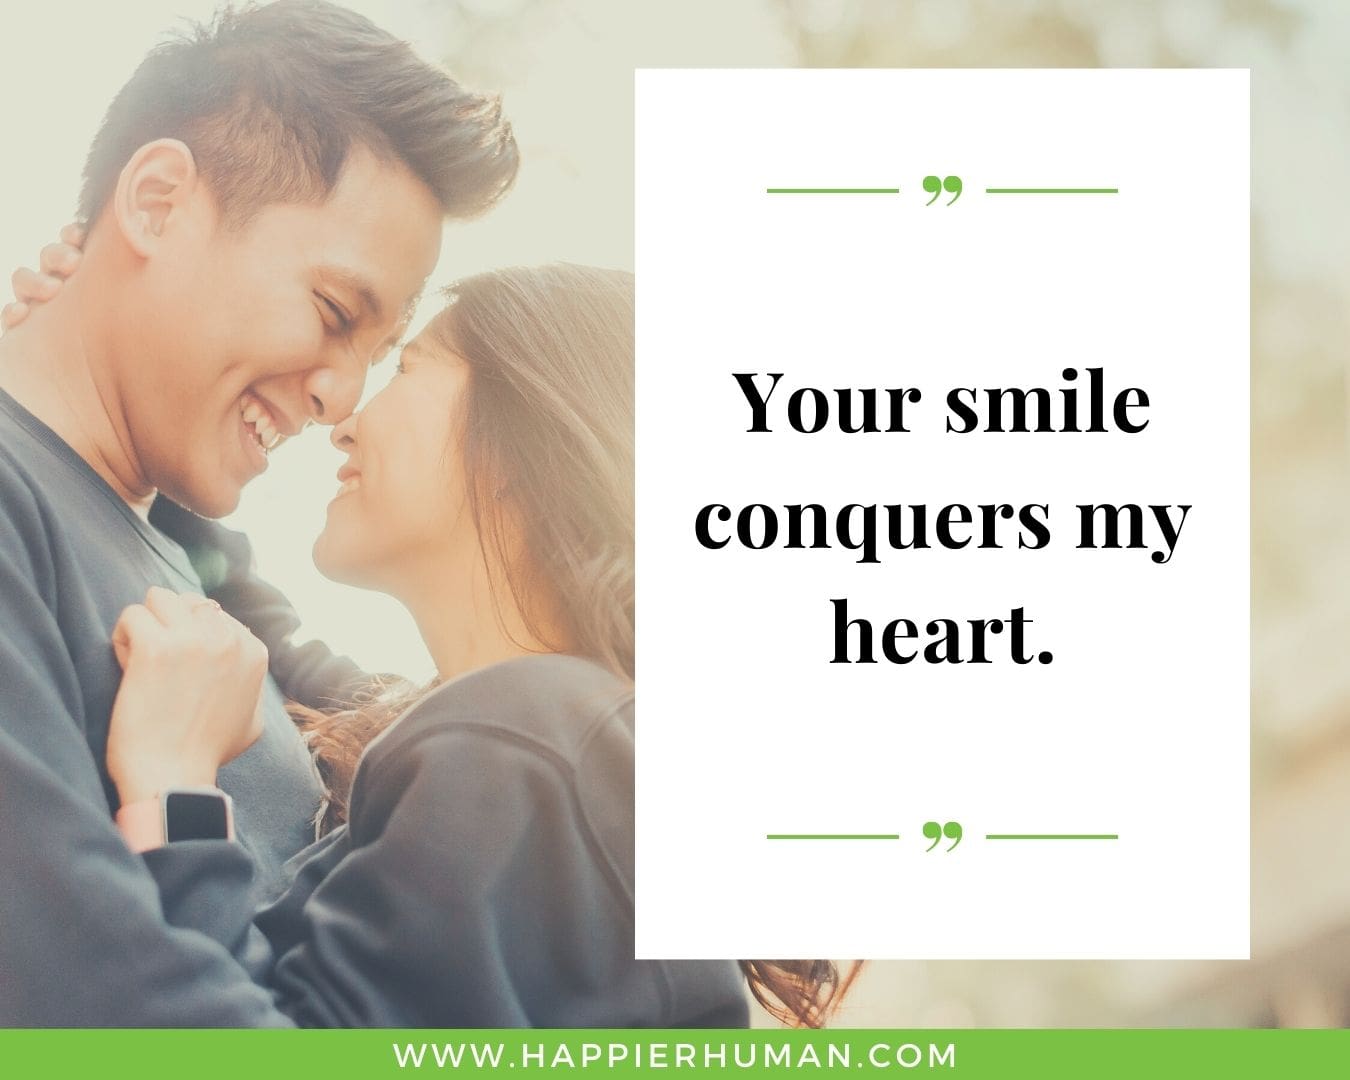 Short, Deep Love Quotes for Her - “Your smile conquers my heart.”